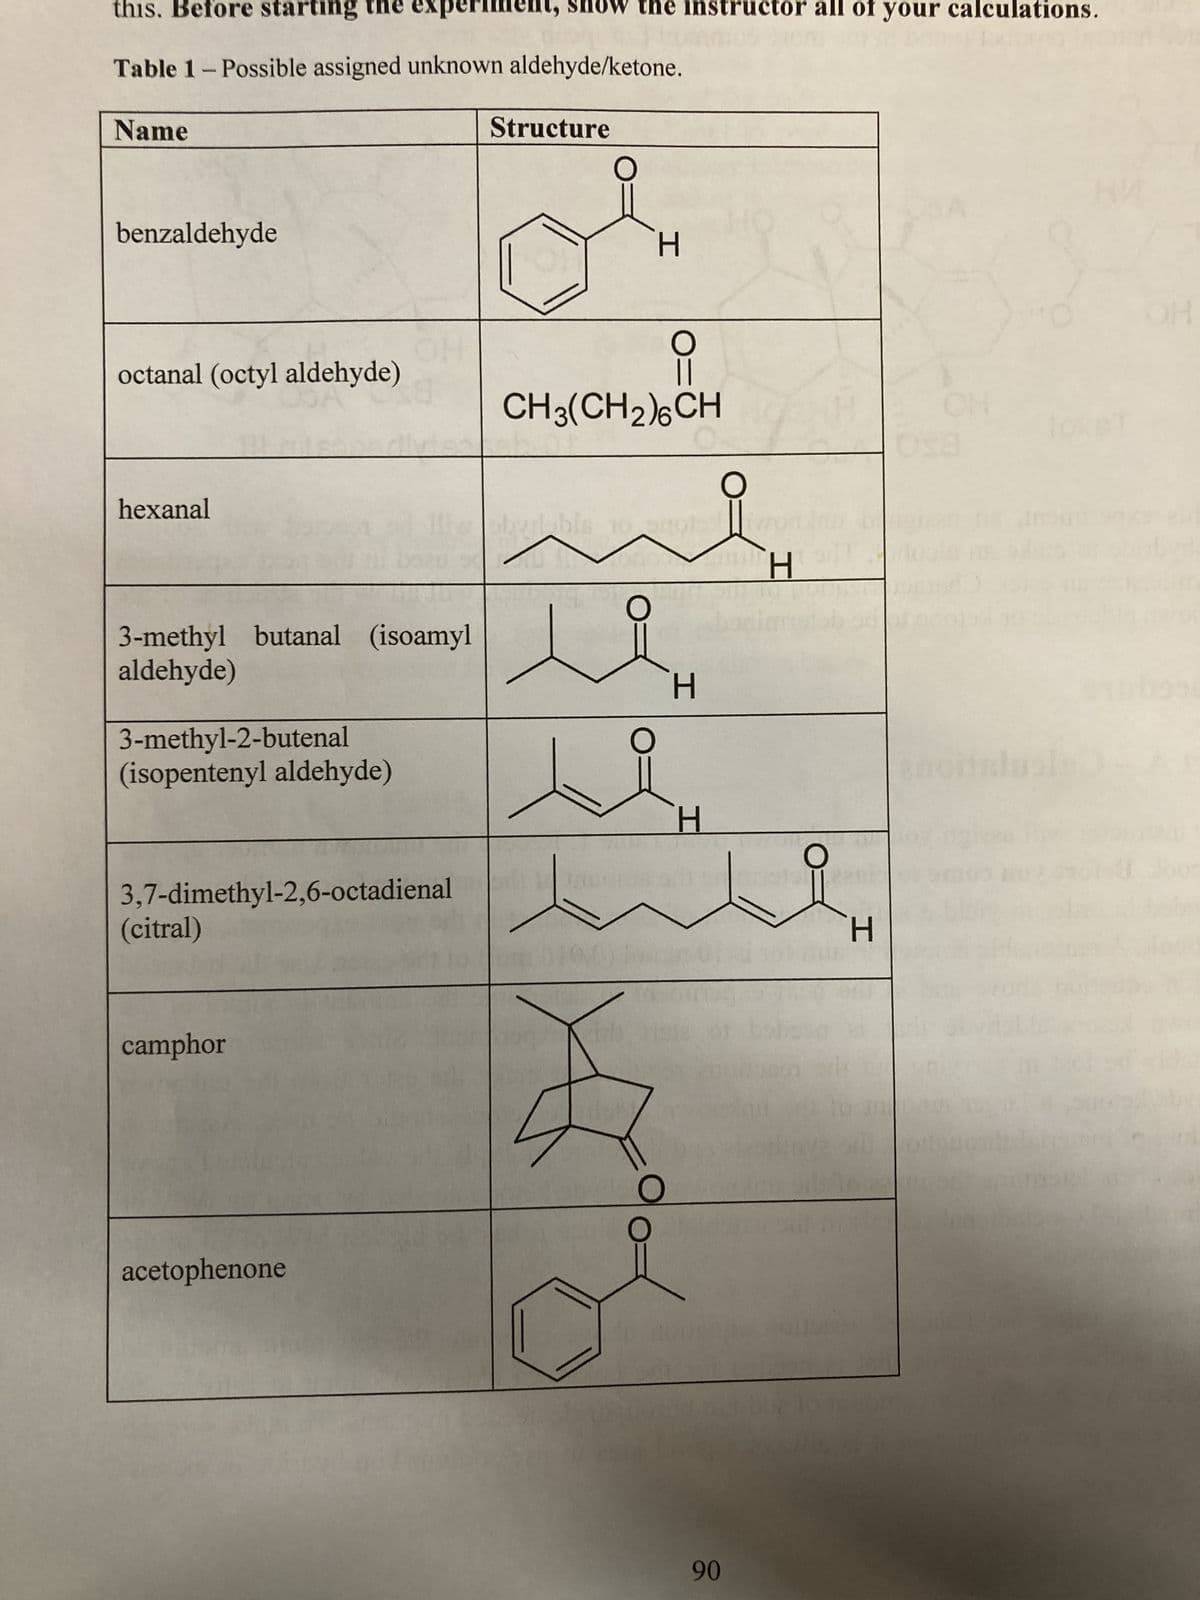 this. Before starting the
Table 1 - Possible assigned unknown aldehyde/ketone.
Name
benzaldehyde
octanal (octyl aldehyde)
hexanal
3-methyl butanal (isoamyl
aldehyde)
3-methyl-2-butenal
(isopentenyl aldehyde)
3,7-dimethyl-2,6-octadienal
(citral)
camphor
ht, show the instructor all of your calculations.
acetophenone
Structure
O
|
H
CH3(CH2)6CH
O
O=
byd bis 109723
-
O
H
O
H
H
O
Denk
90
H
"O